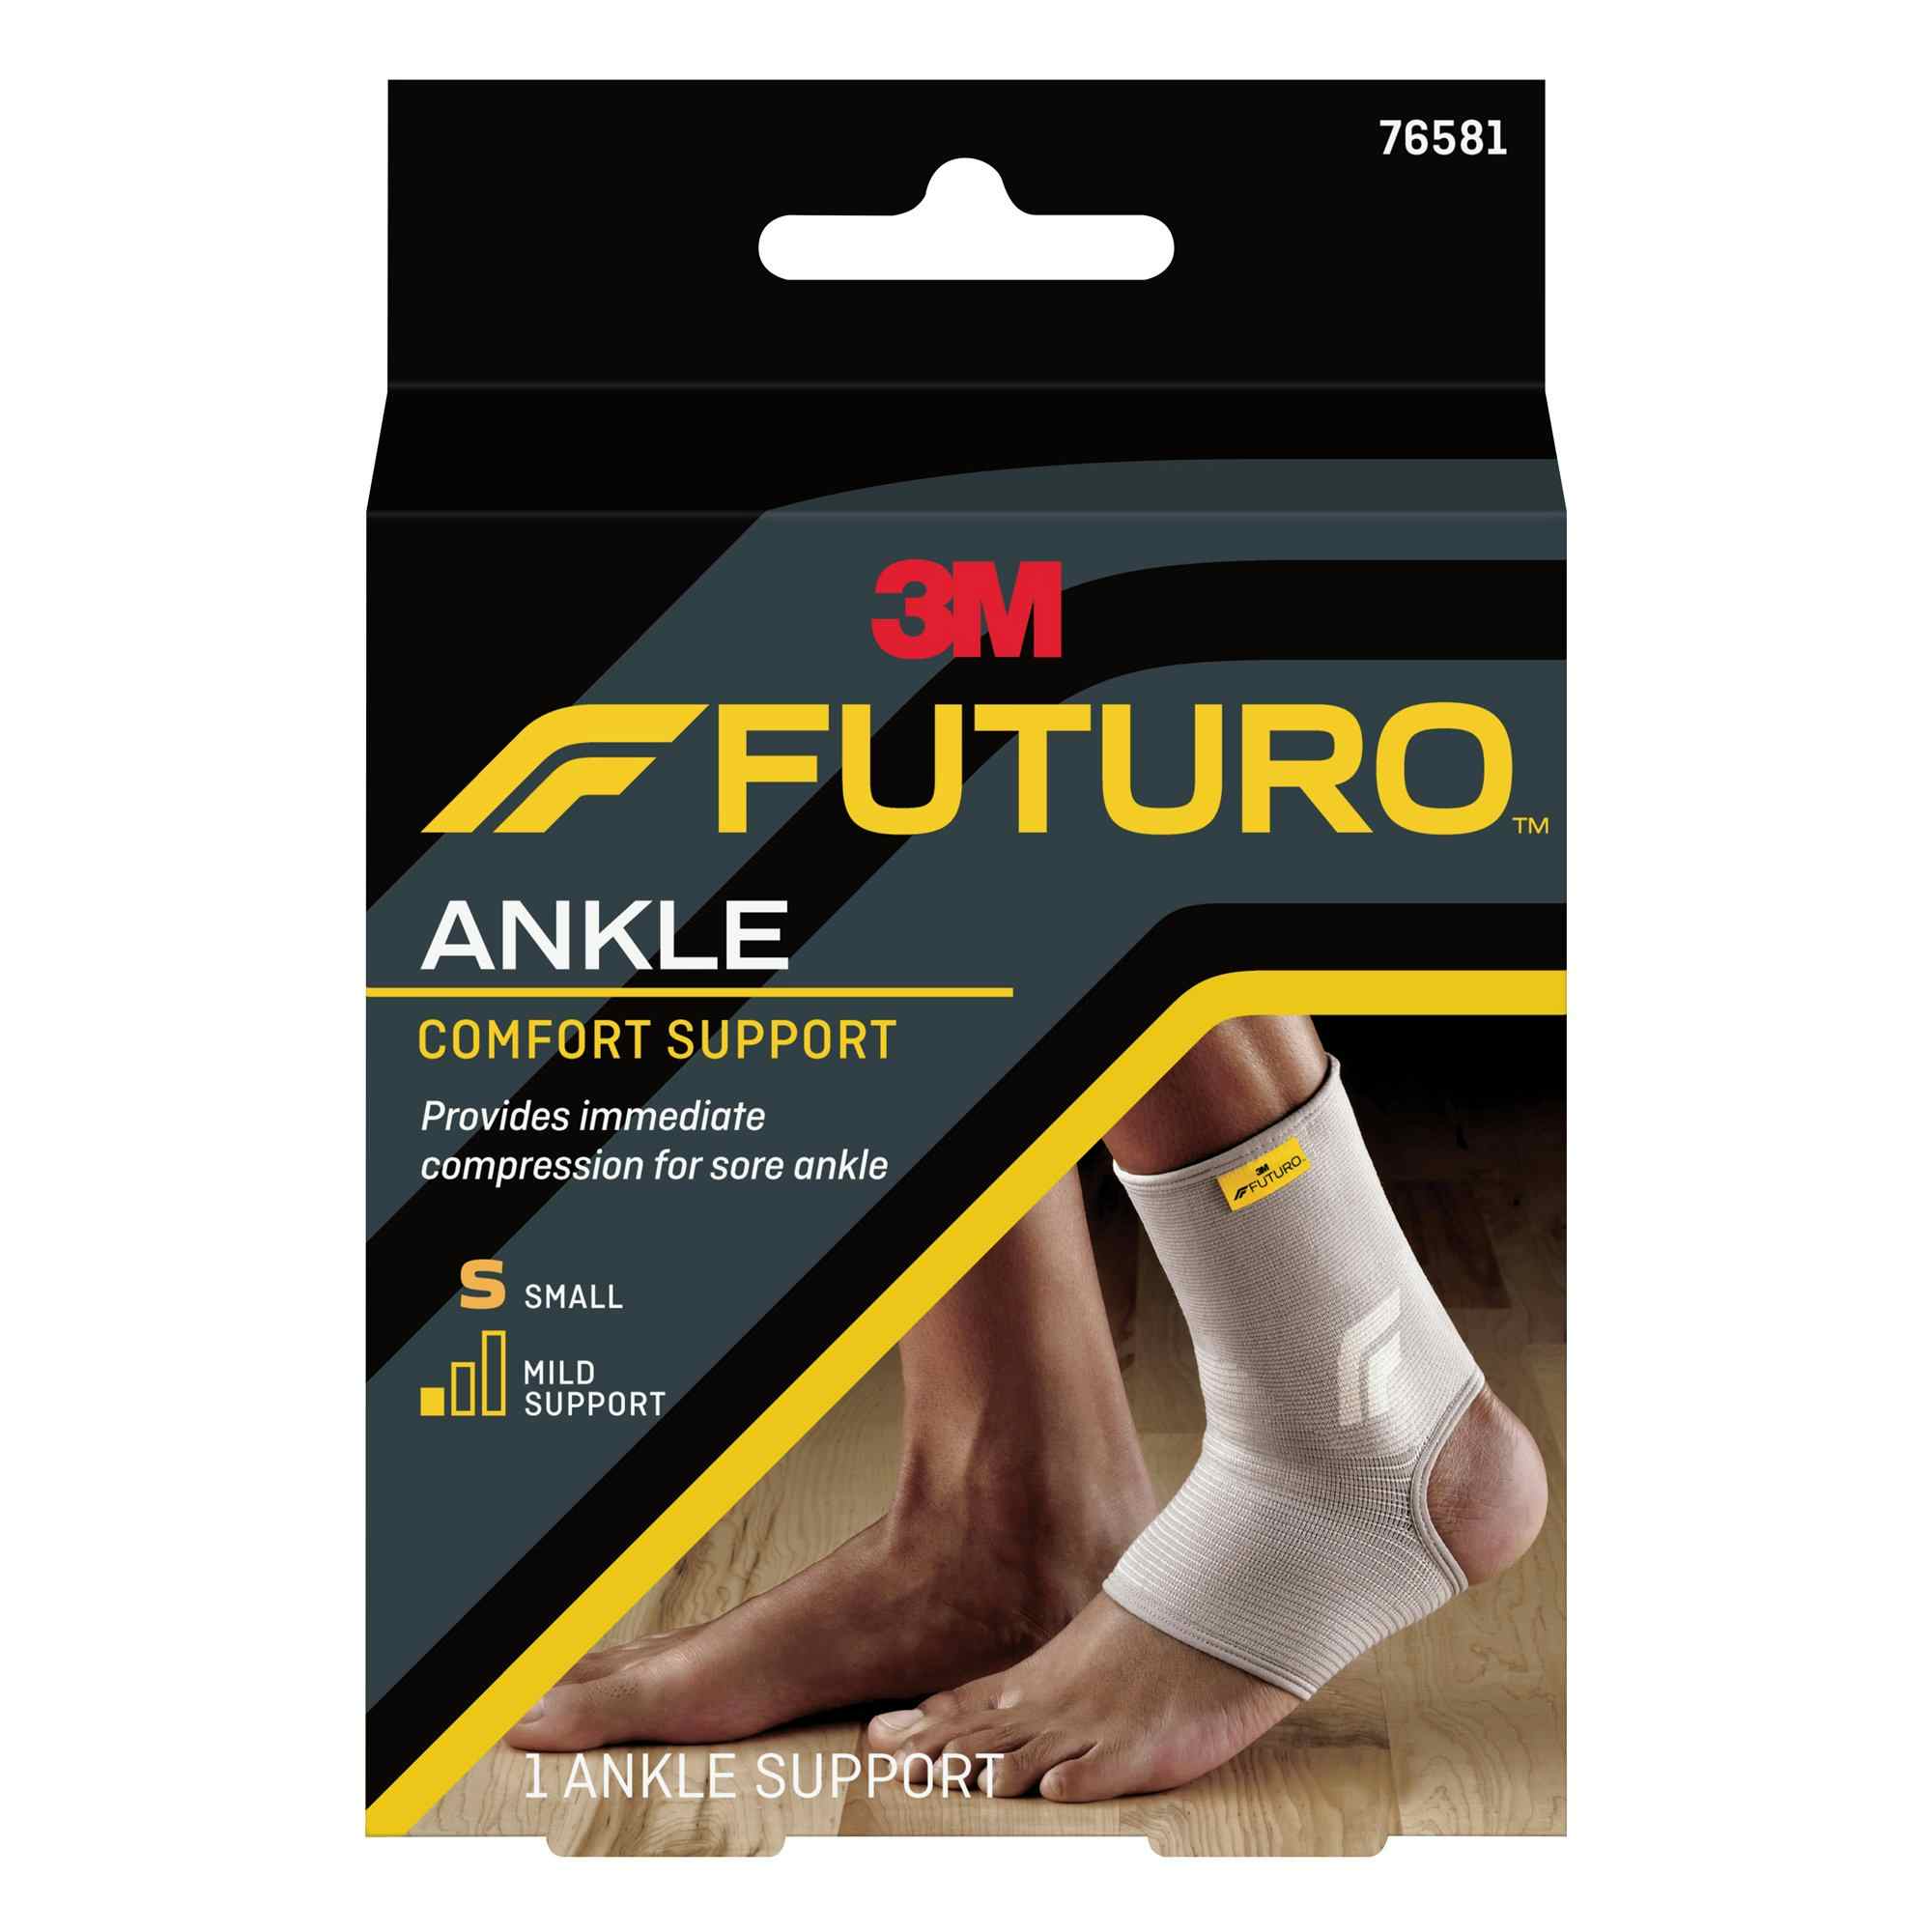 3M Futuro Ankle Comfort Support, 76581ENR, Small - Box of 3